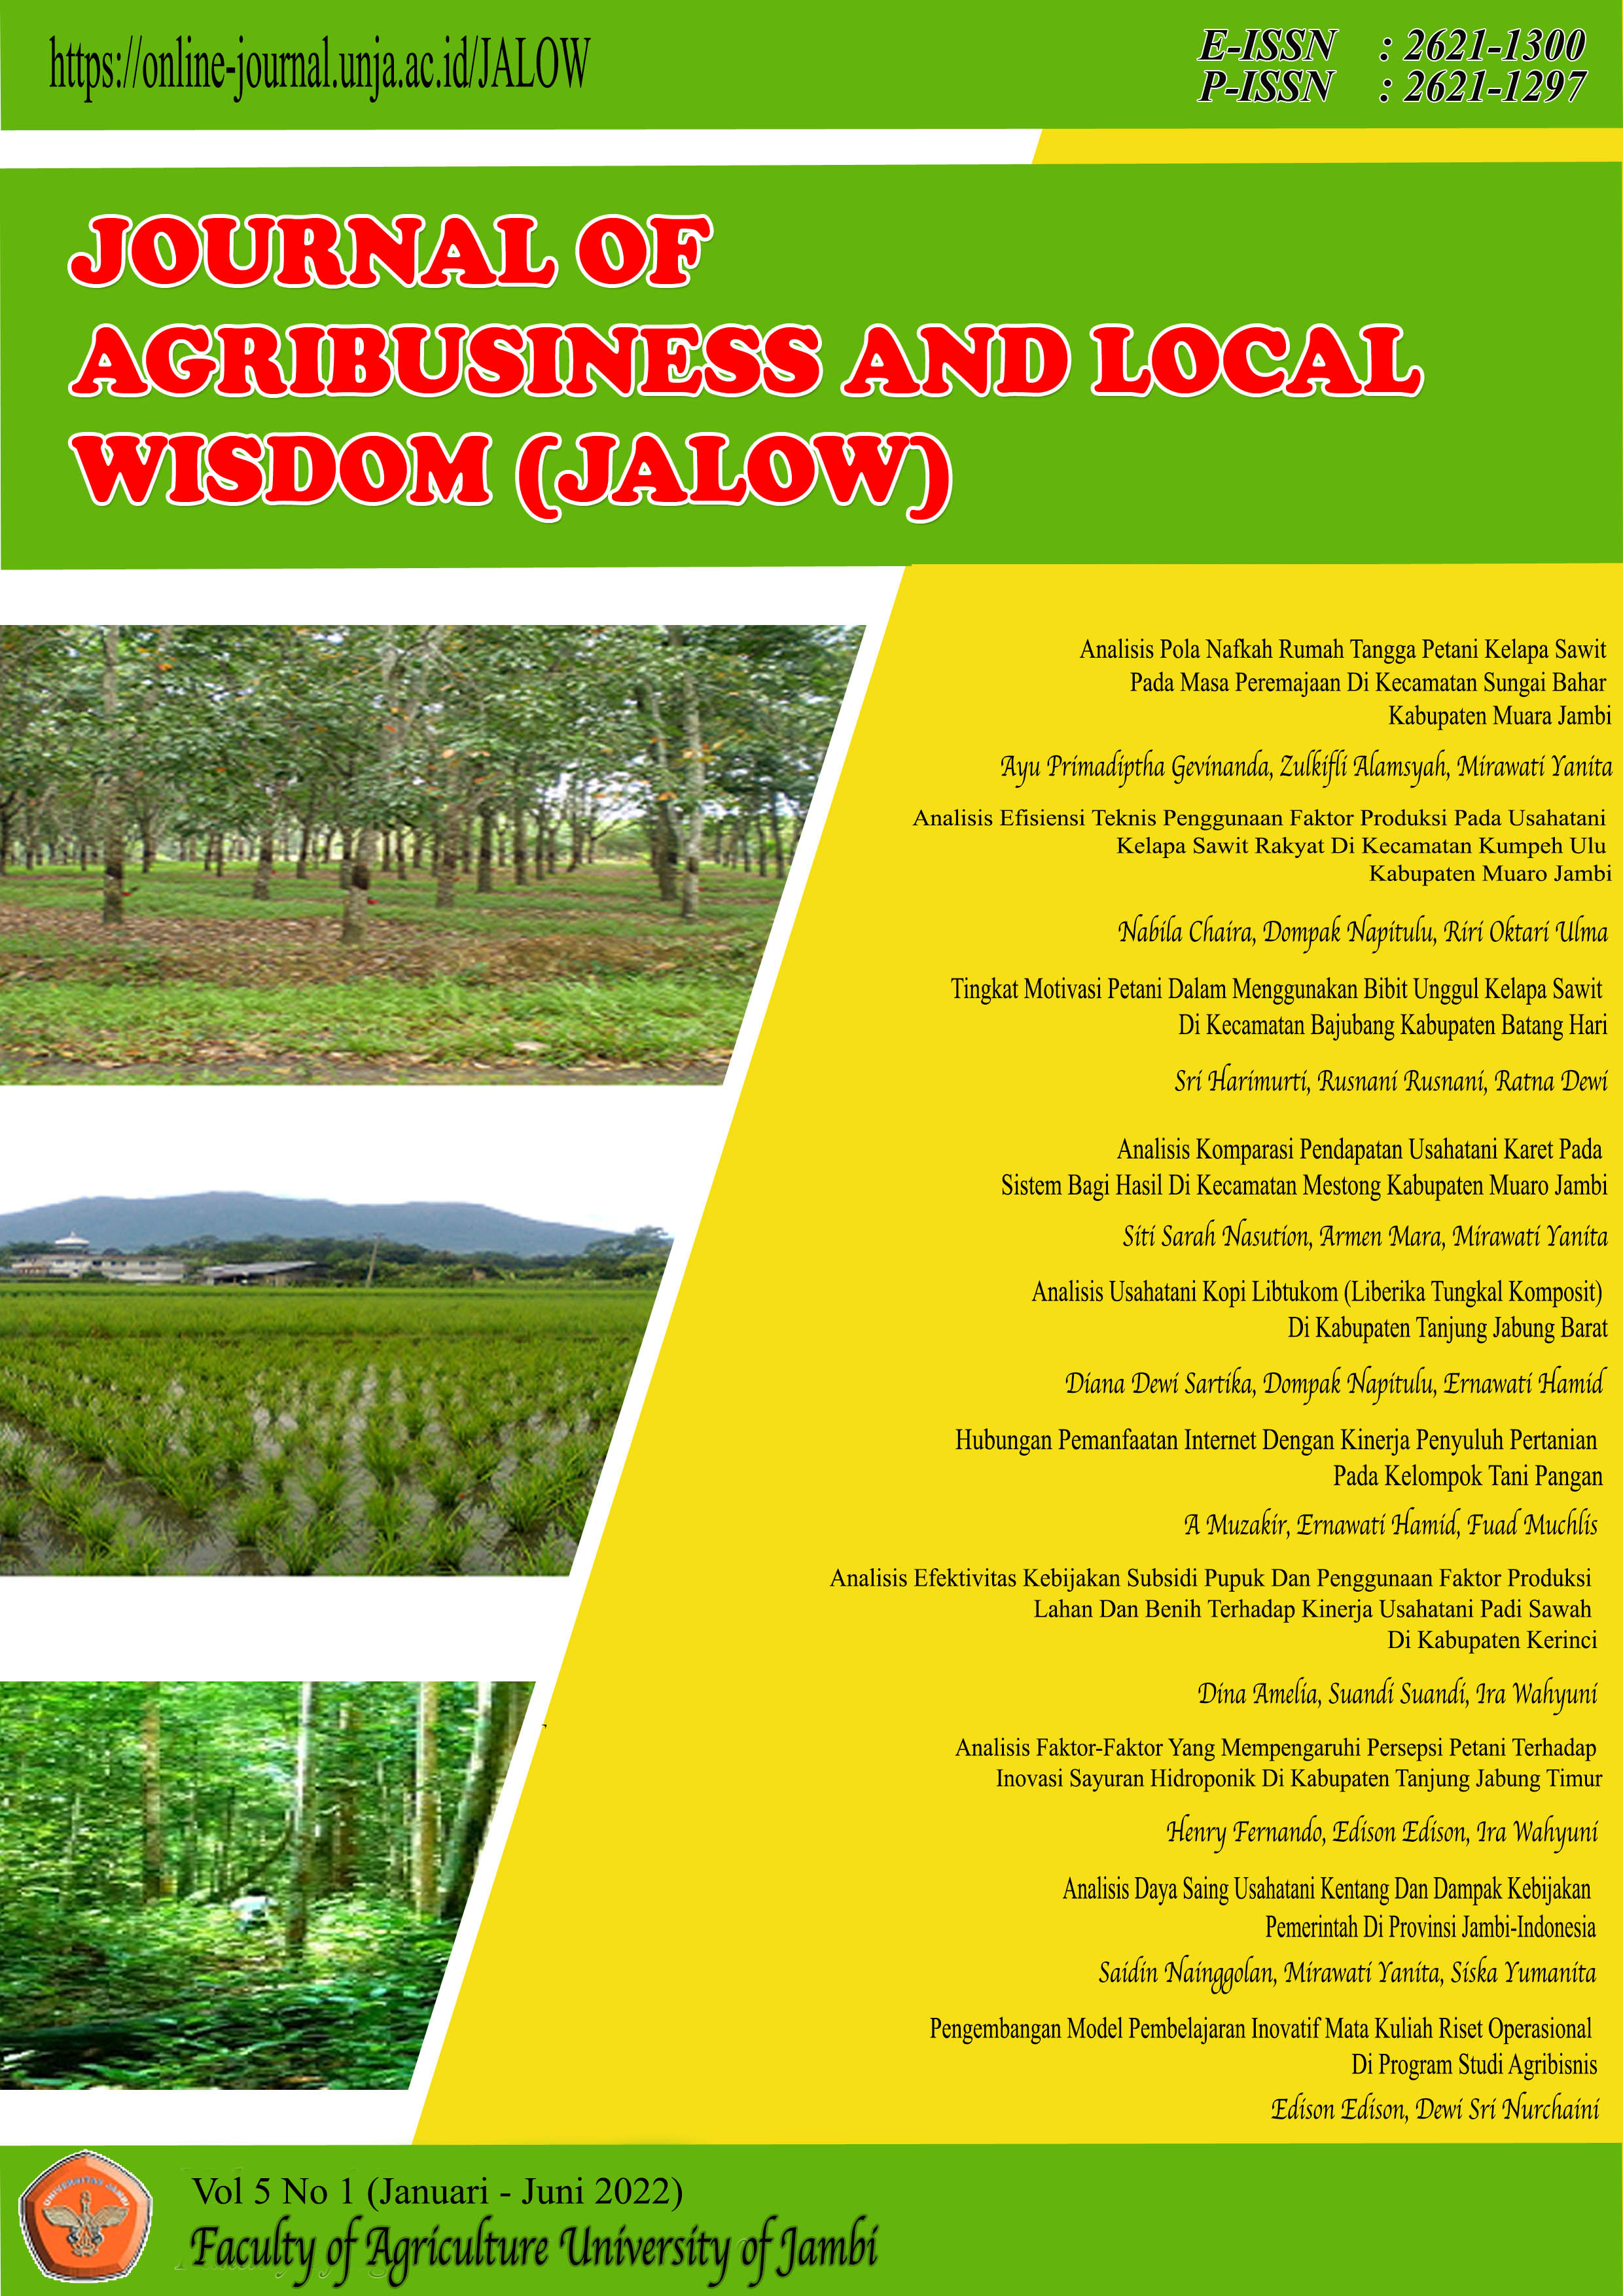 					View Vol. 5 No. 1 (2022): Journal Agribusiness and Local Wisdom
				